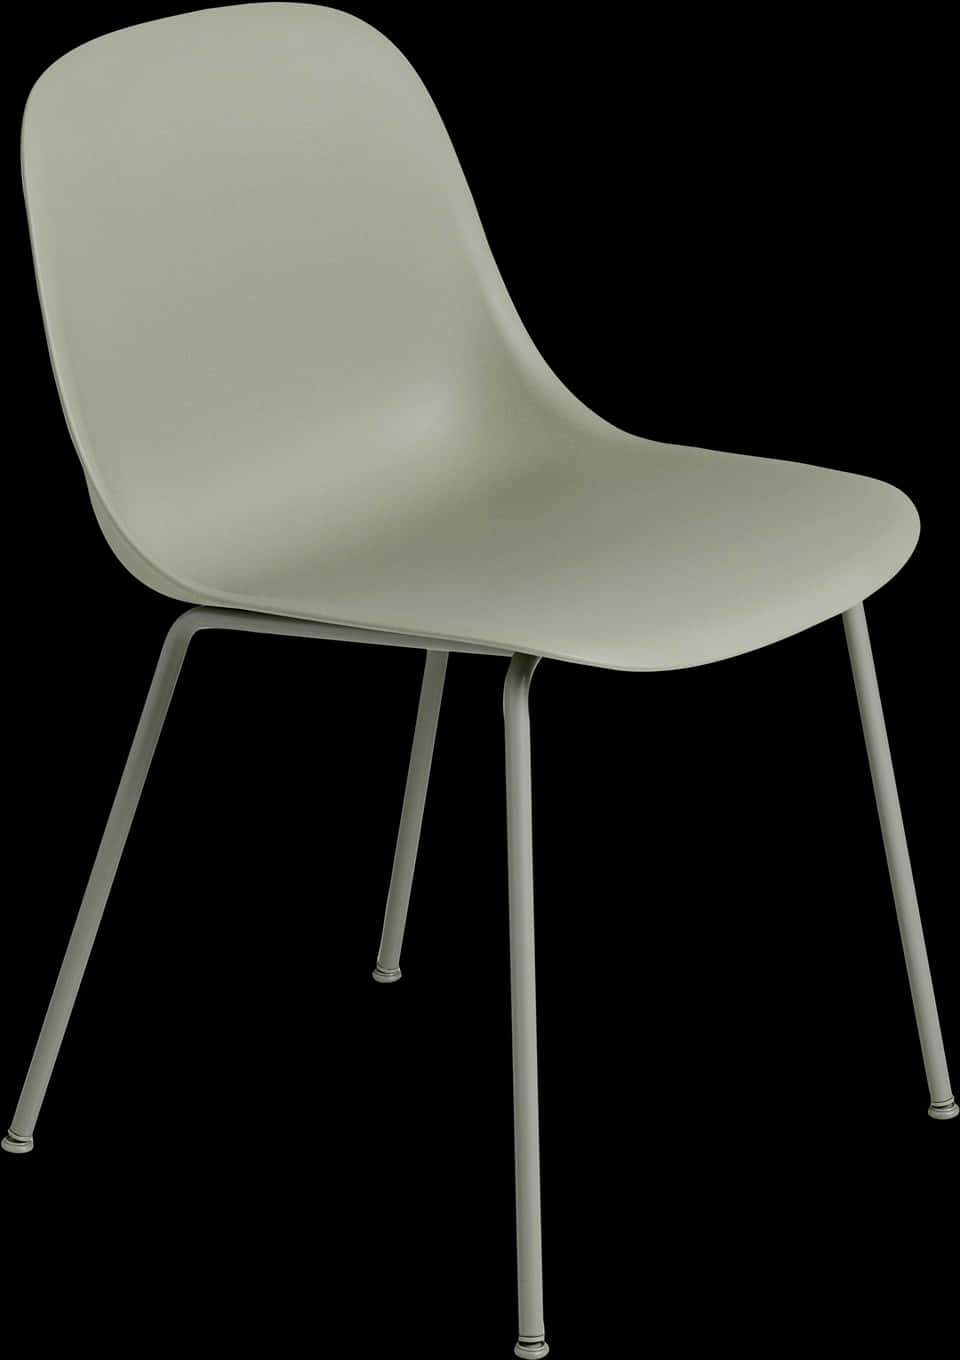 Modern White Plastic Chair Isolated PNG